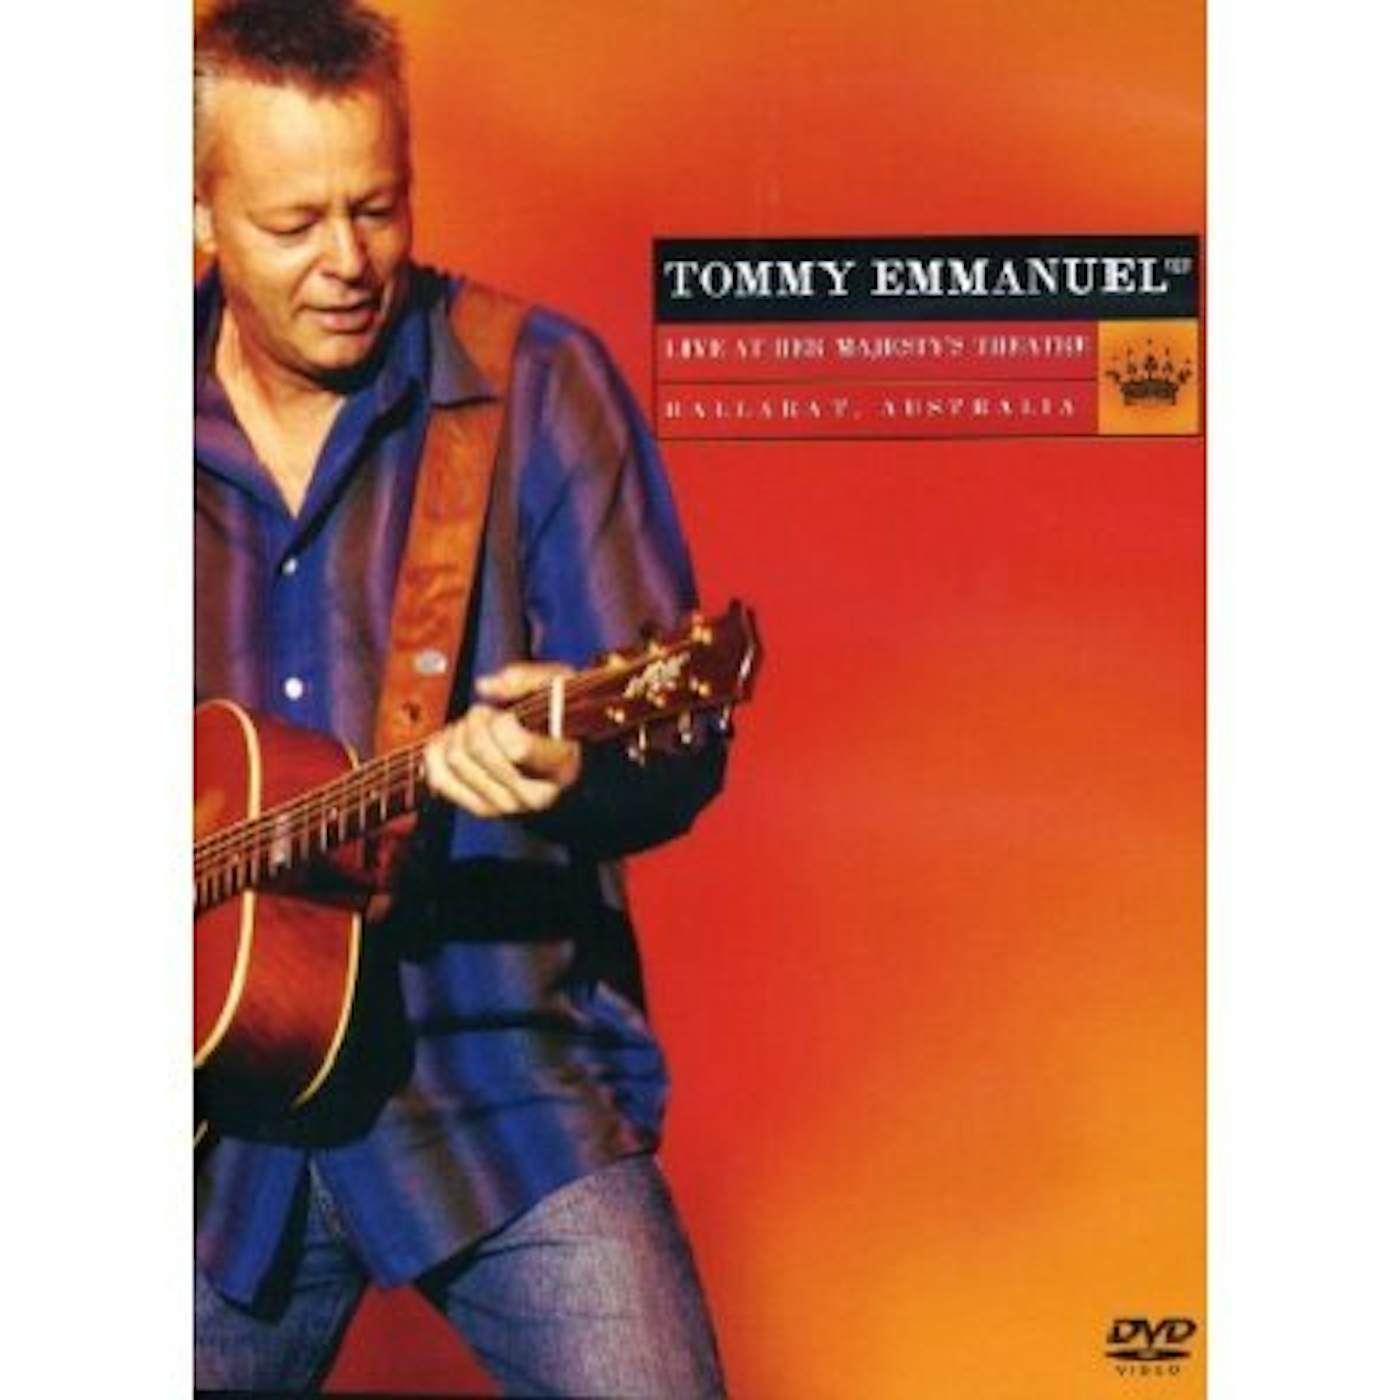 Tommy Emmanuel LIVE AT HER MAJESTY'S THEATRE DVD